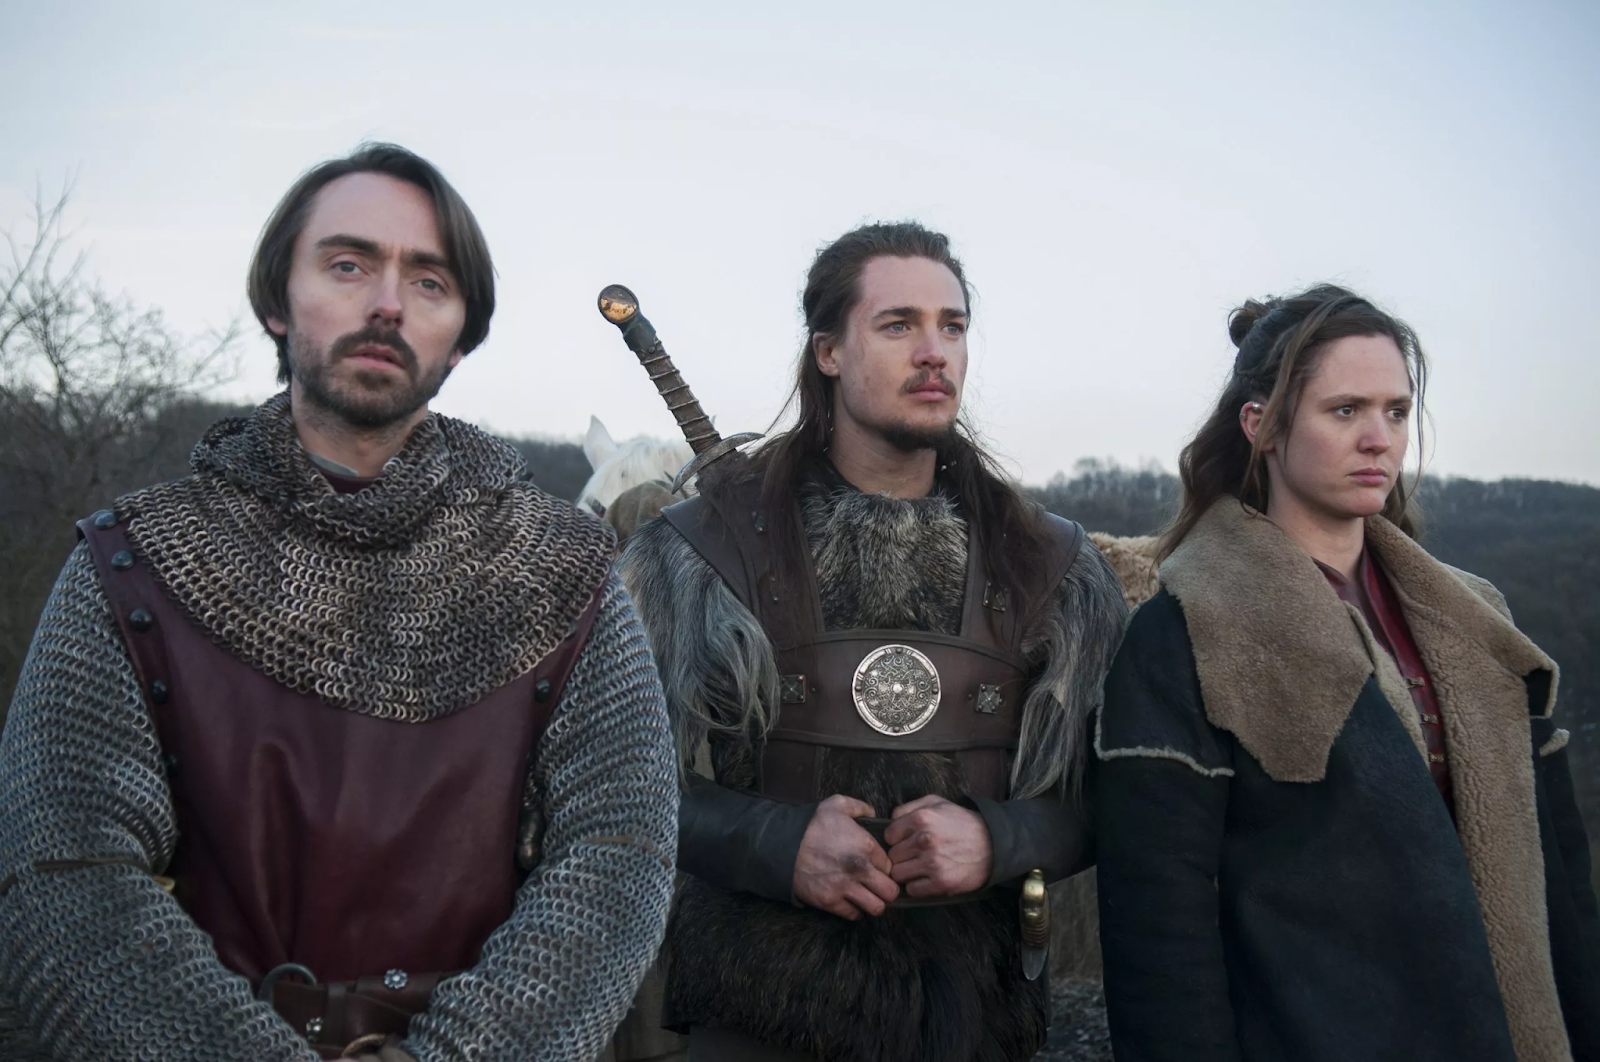 Will There Be a Season 6 of Netflix's 'The Last Kingdom'?